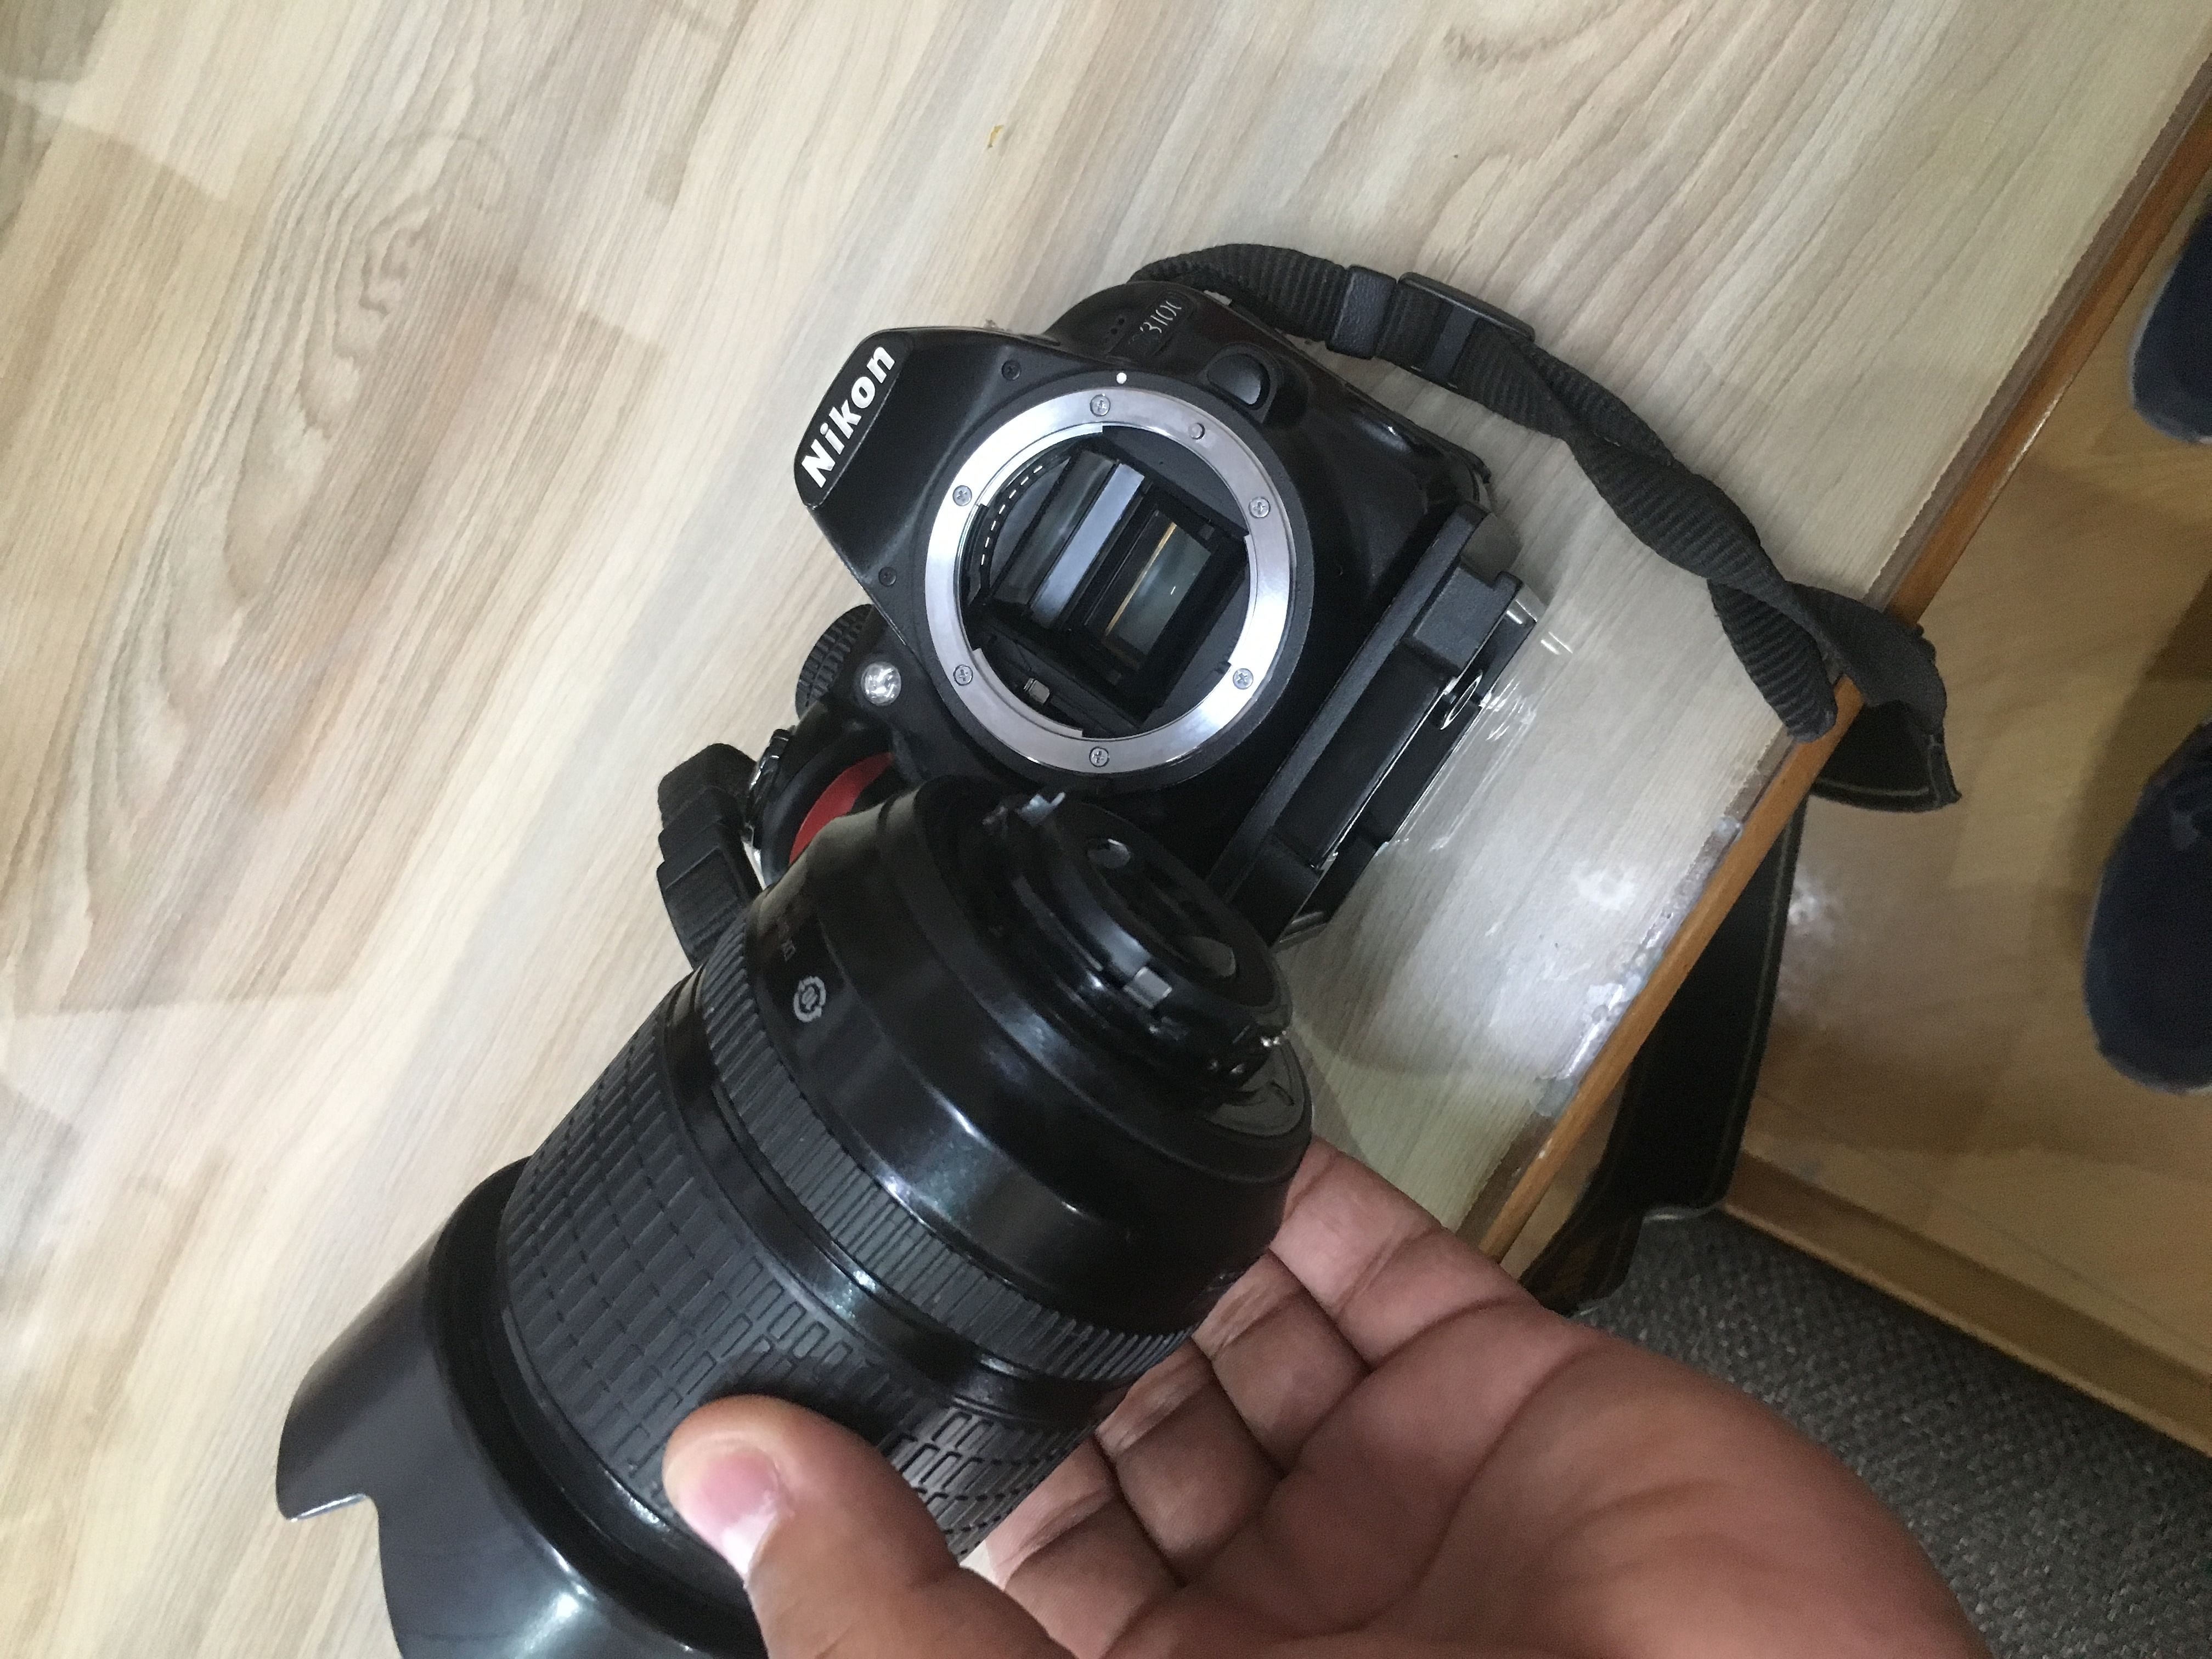 A journalist's camera was allegedly broken by J&K security personnel. | Photo: Azaan Javaid | ThePrint